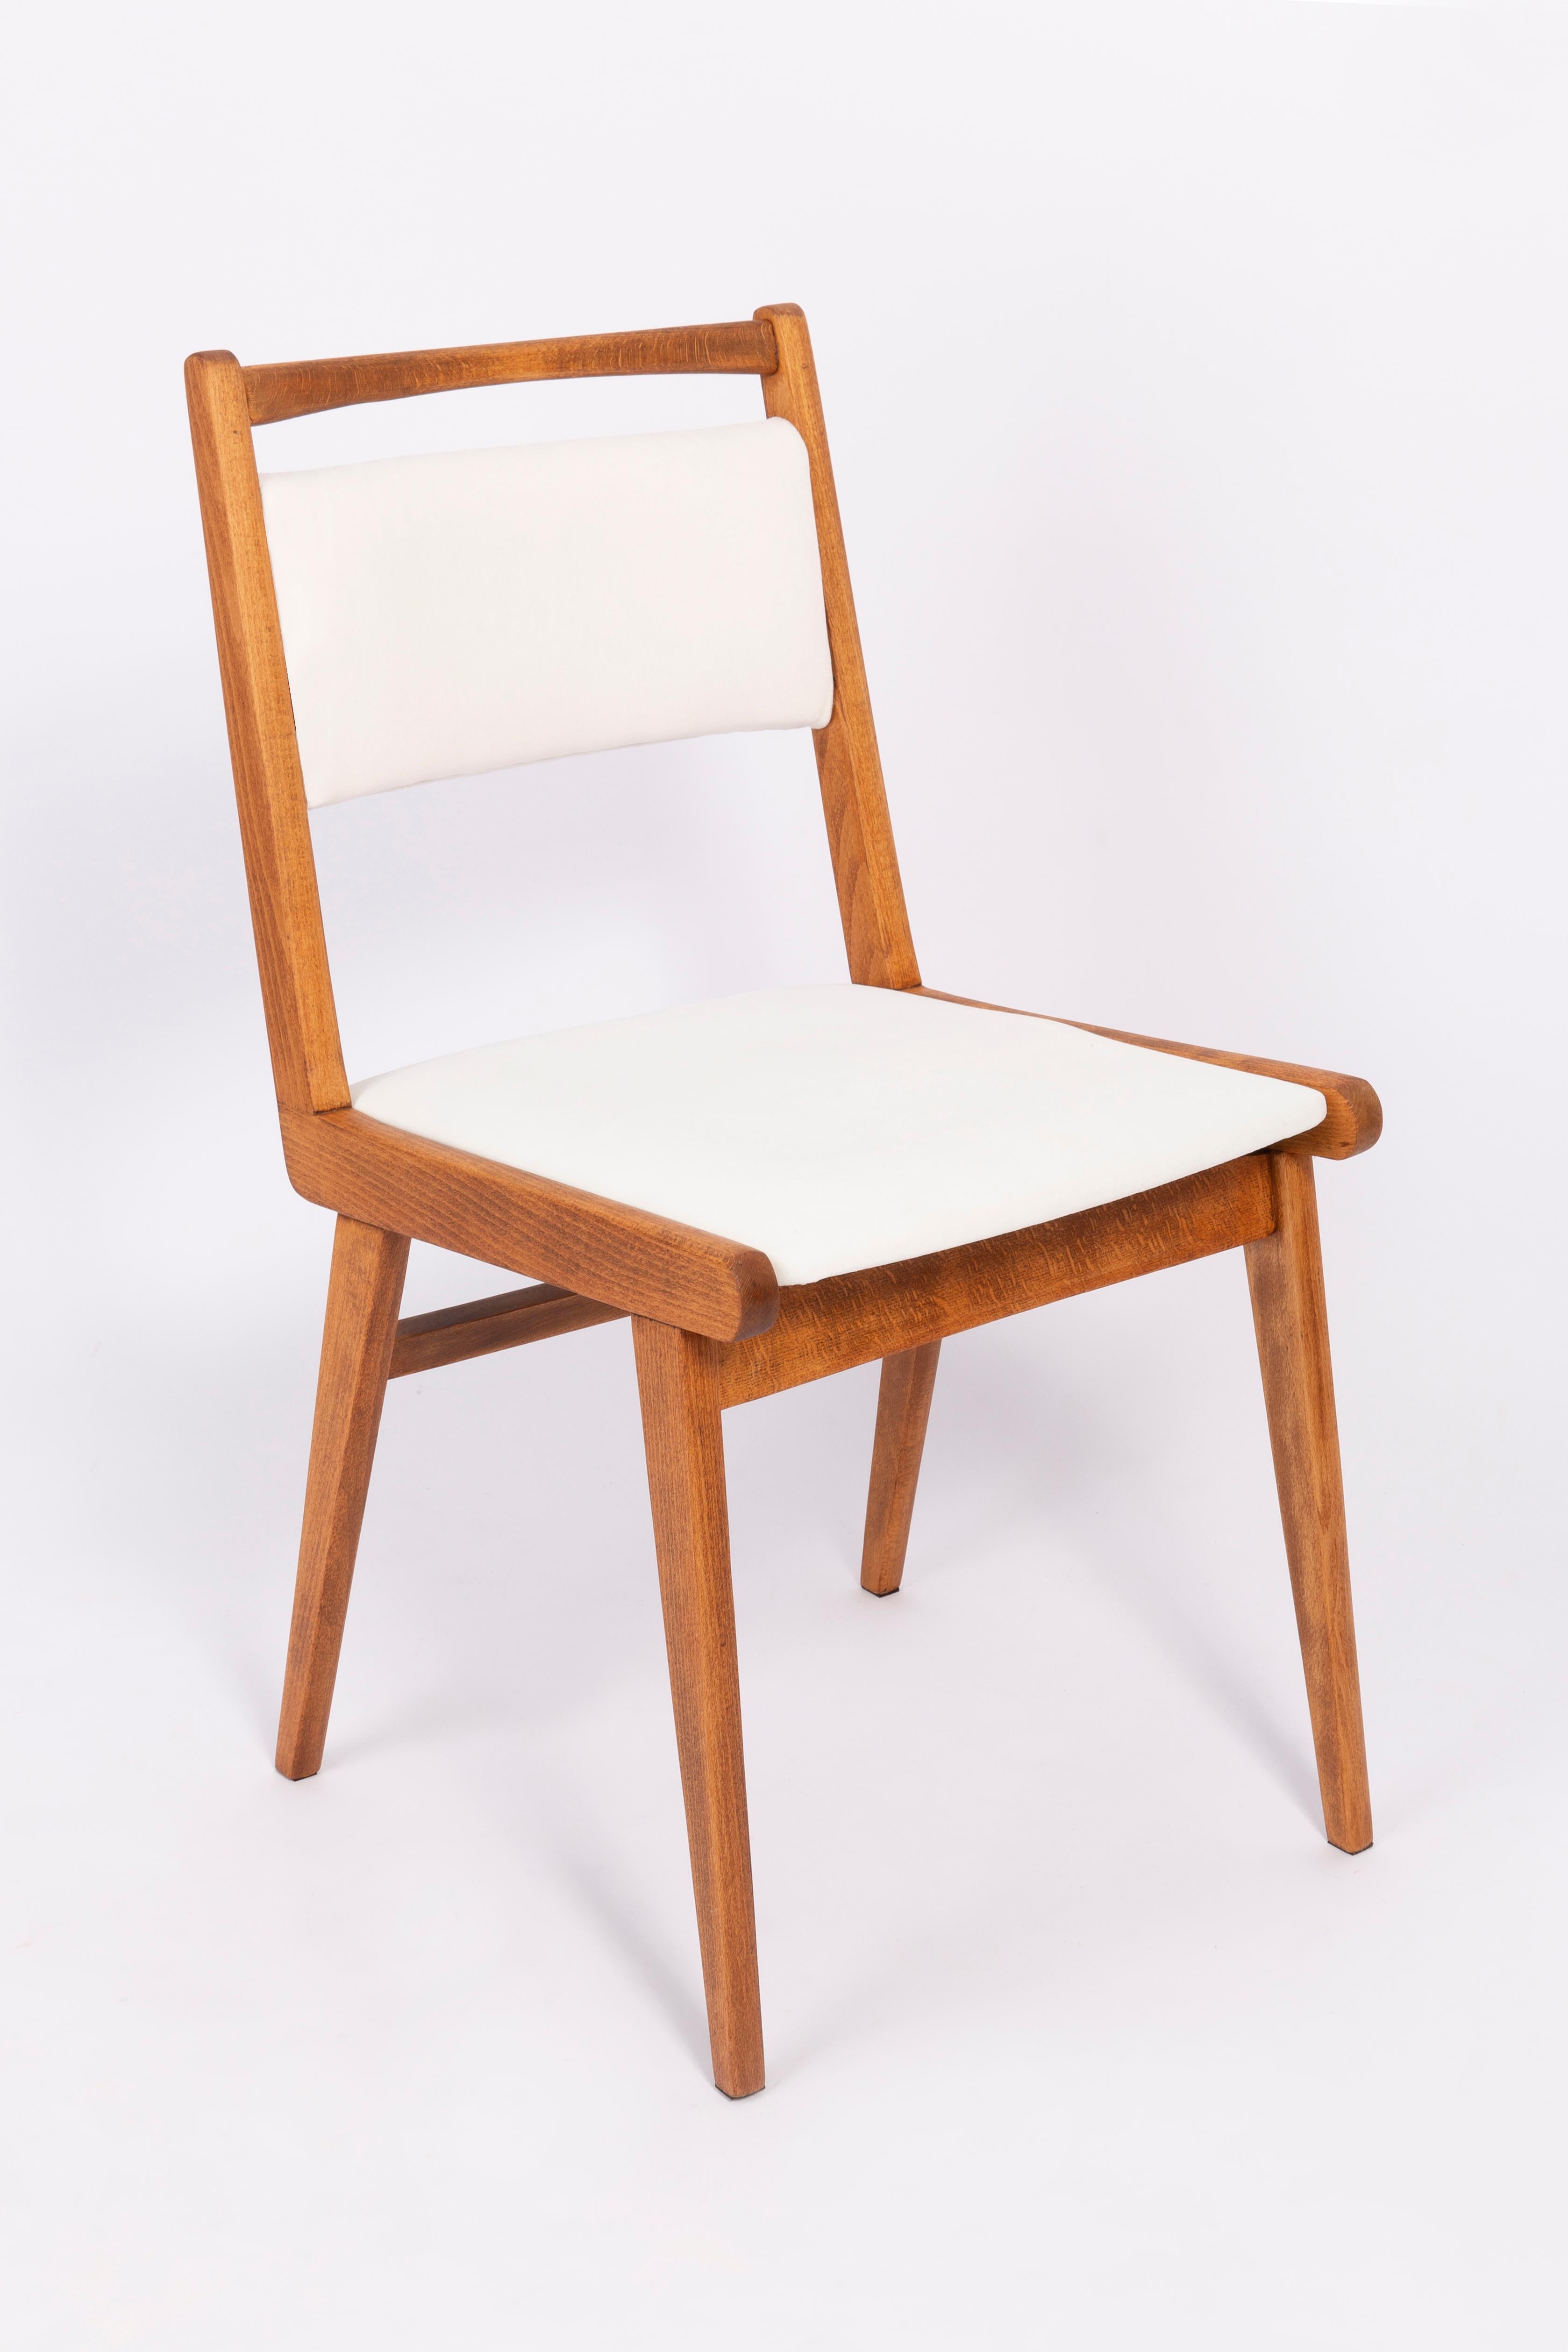 Chairs designed by Prof. Rajmund Halas. It is JAR type model. Made of beechwood. Chairs are after a complete upholstery renovation, the woodwork has been refreshed. Seat and back is dressed in a blue and white, durable and pleasant to the touch